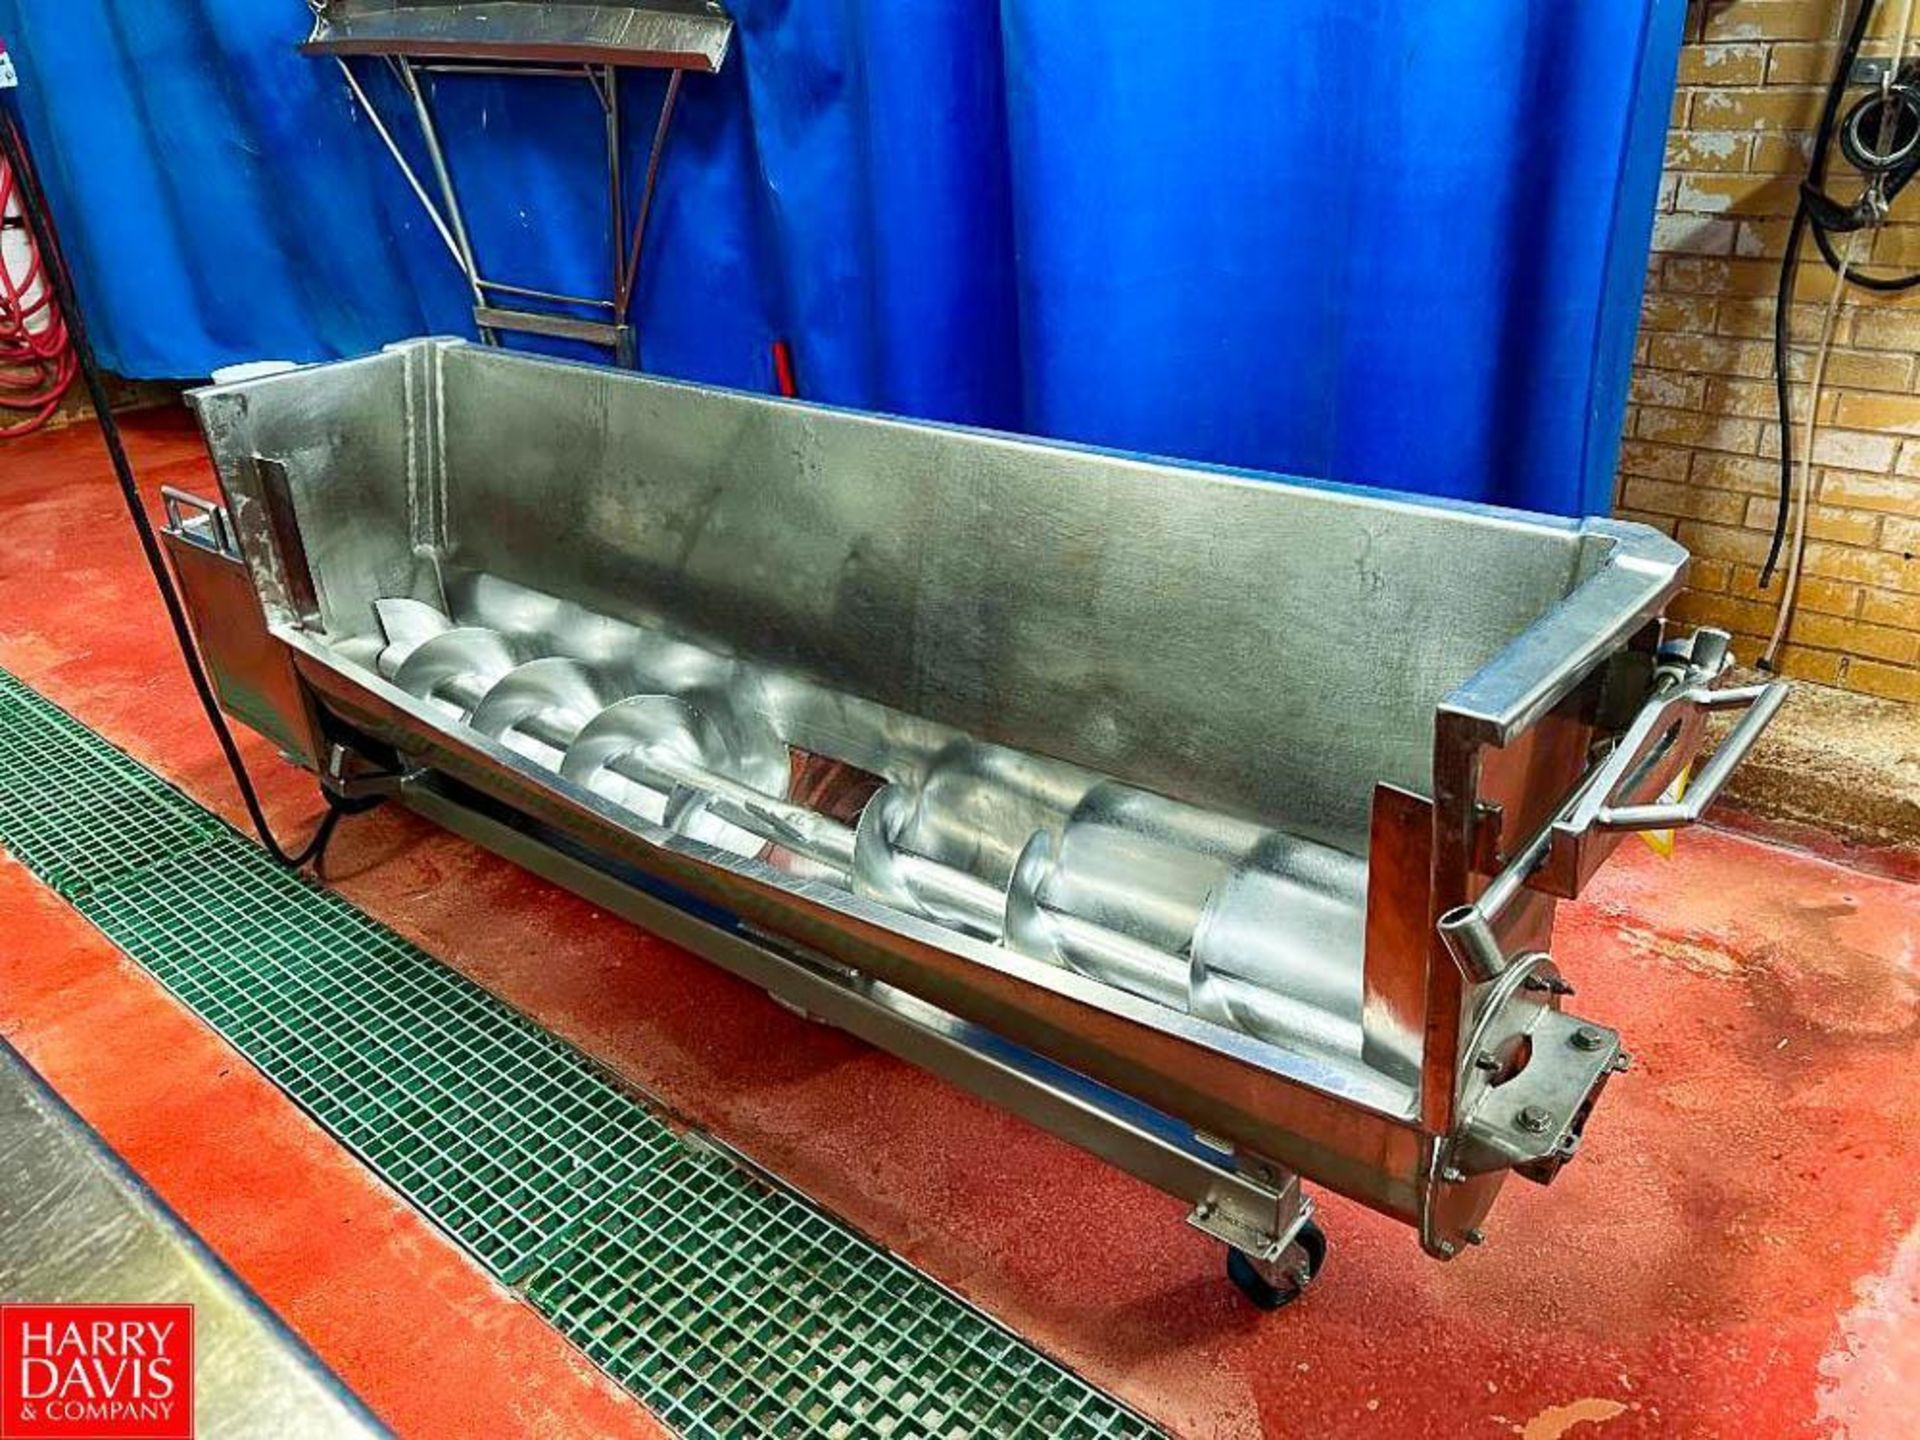 S/S Curd Unloader with Auger - Rigging Fee: $500